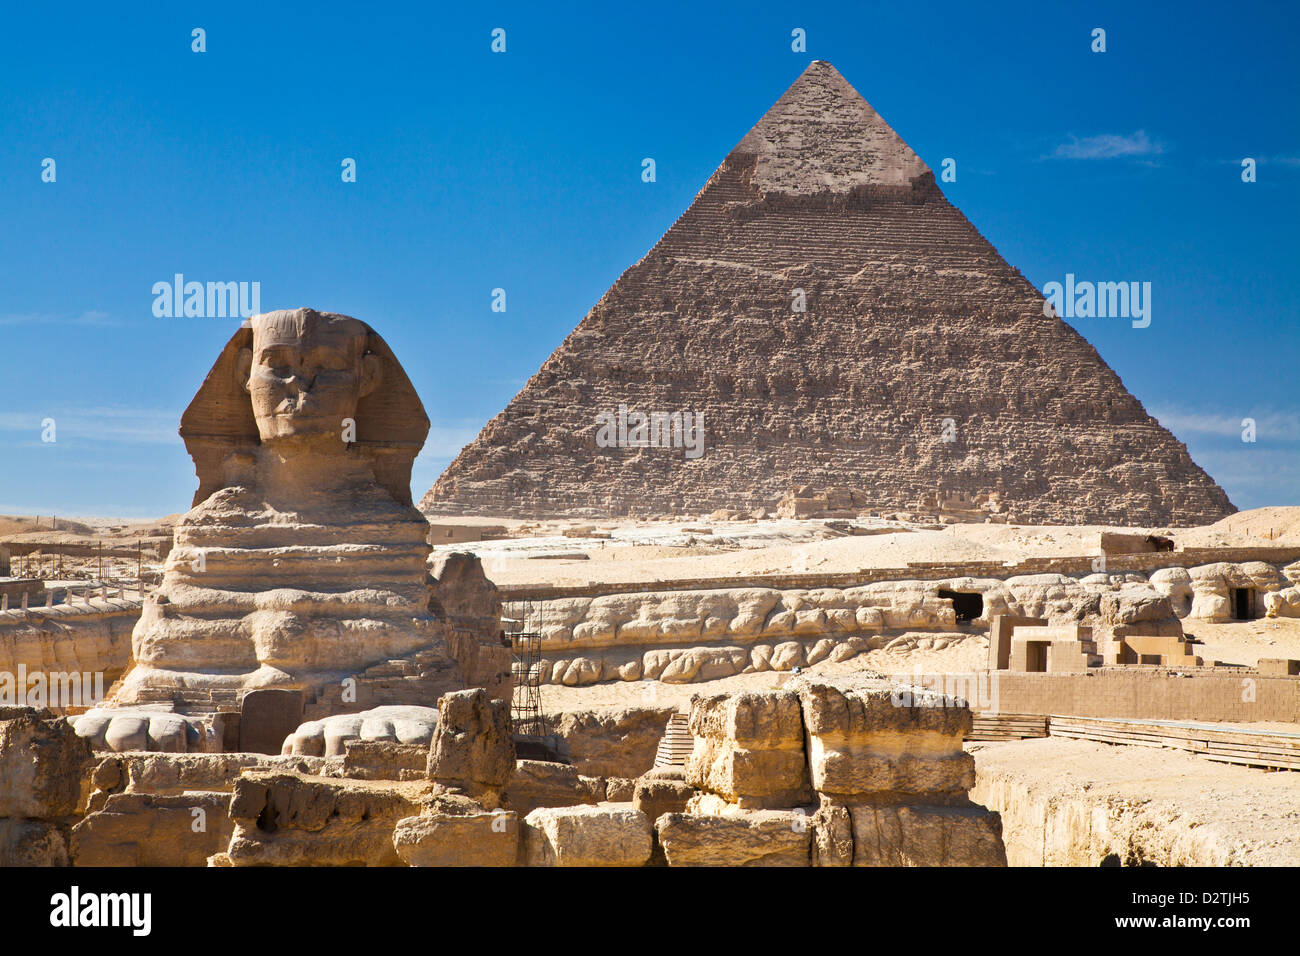 The Pyramid of Khafre, also known as Chephren, and the Sphinx at the necropolis on the Giza plateau near Cairo, Egypt Stock Photo